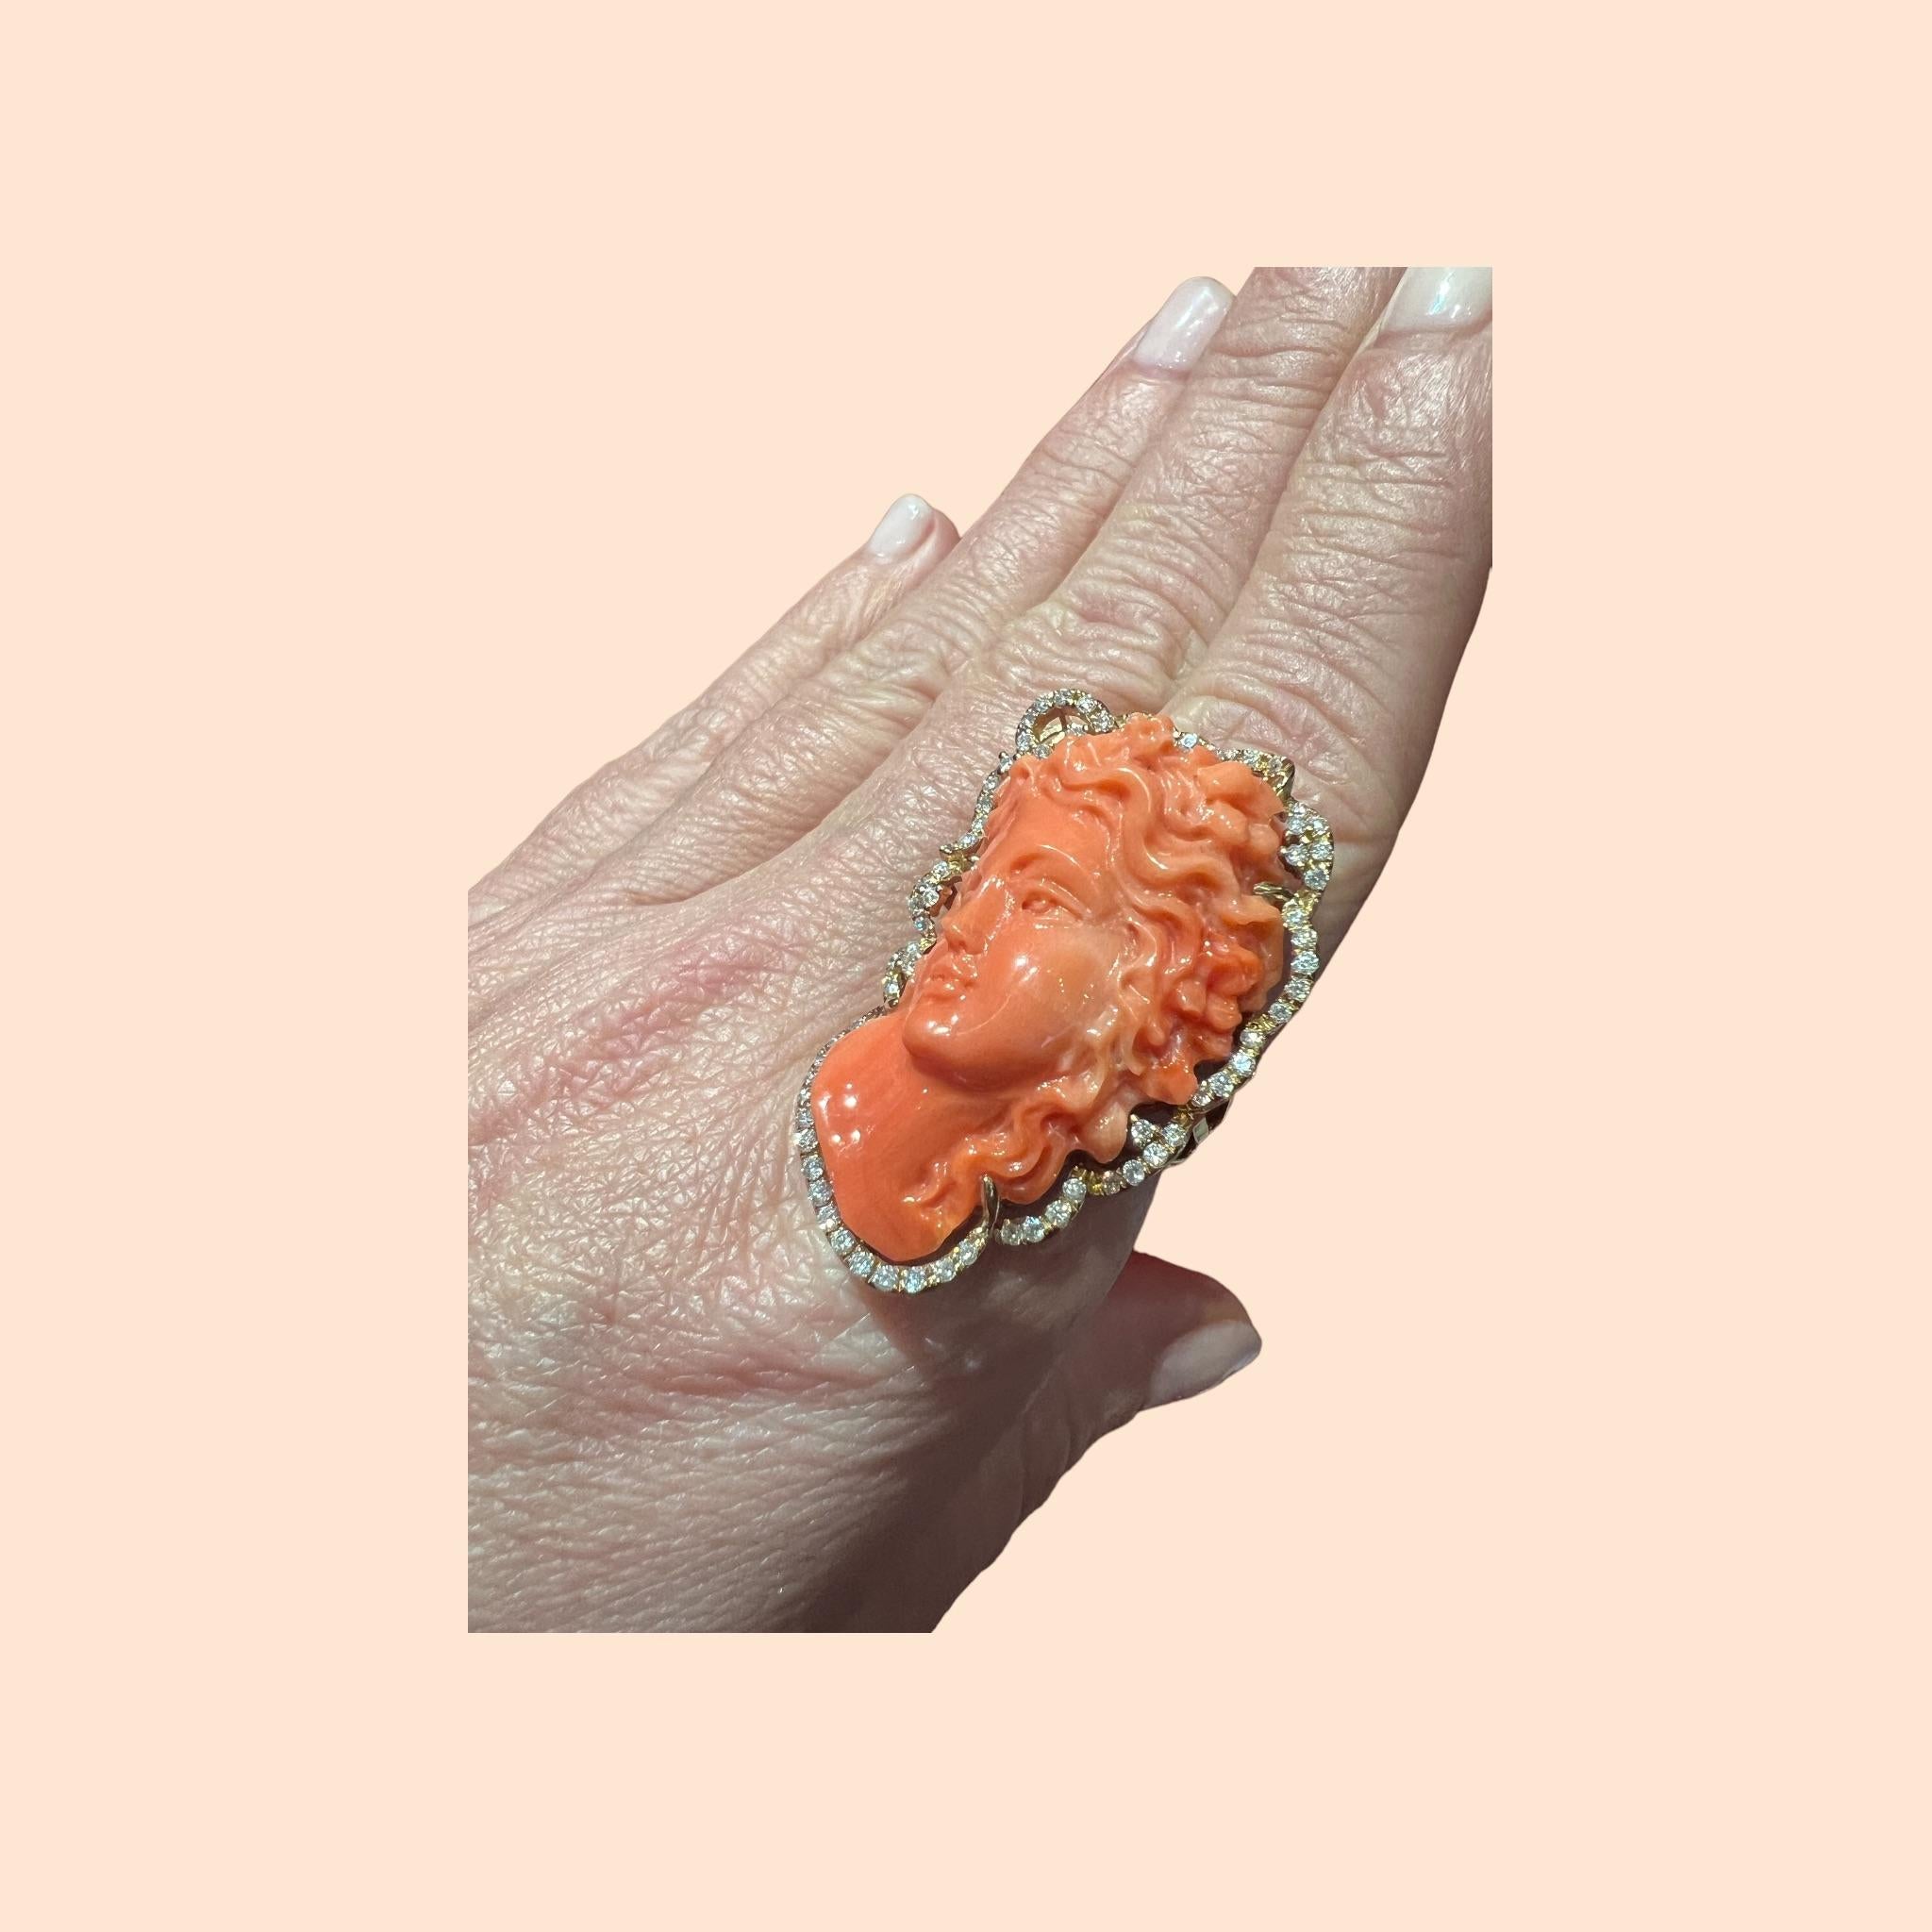 Round Cut 18 Carat Gold Cocktail Ring Set with a Superb Cameo in Coral with diamonds